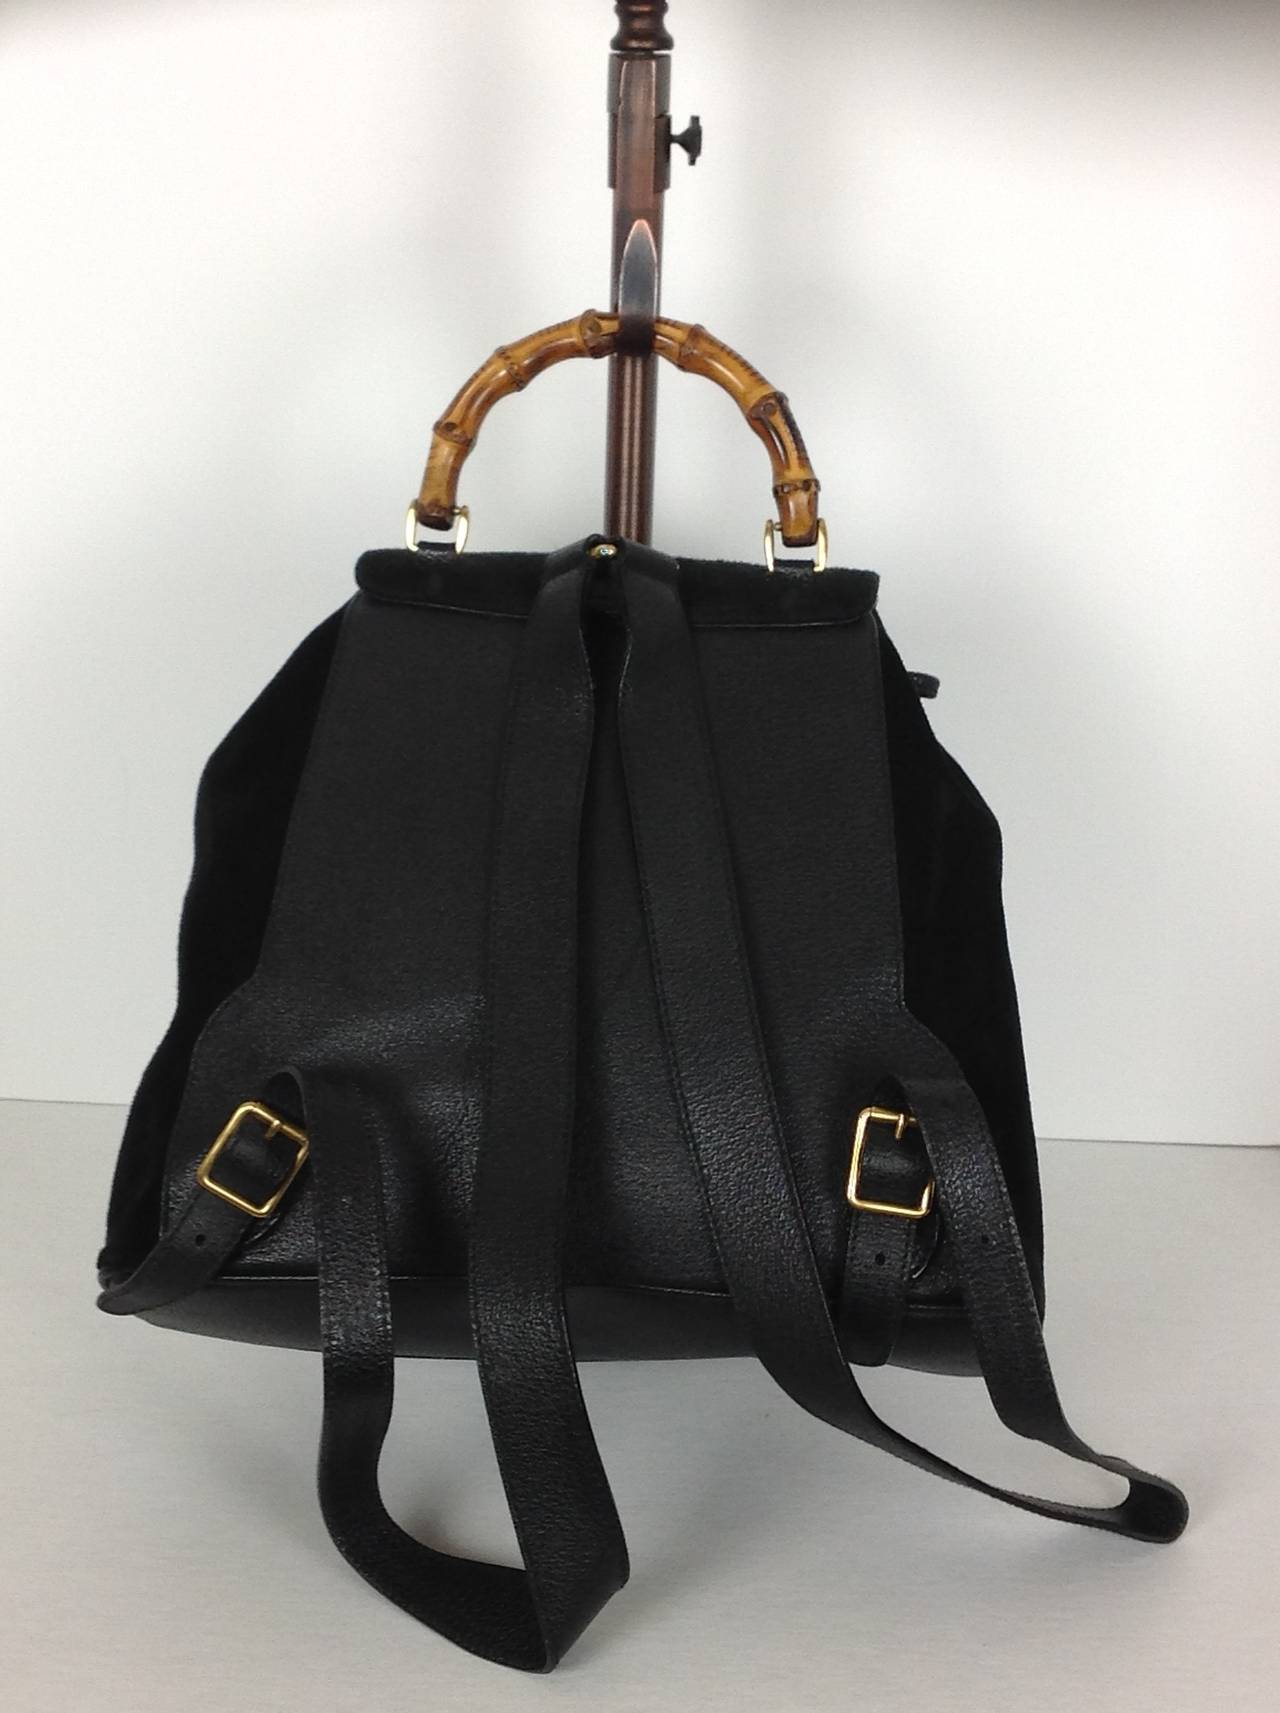 Gucci black leather and suede bamboo sac backpack.
Black suede body. Suede flap with buckle closure, and interior drawstring.
12